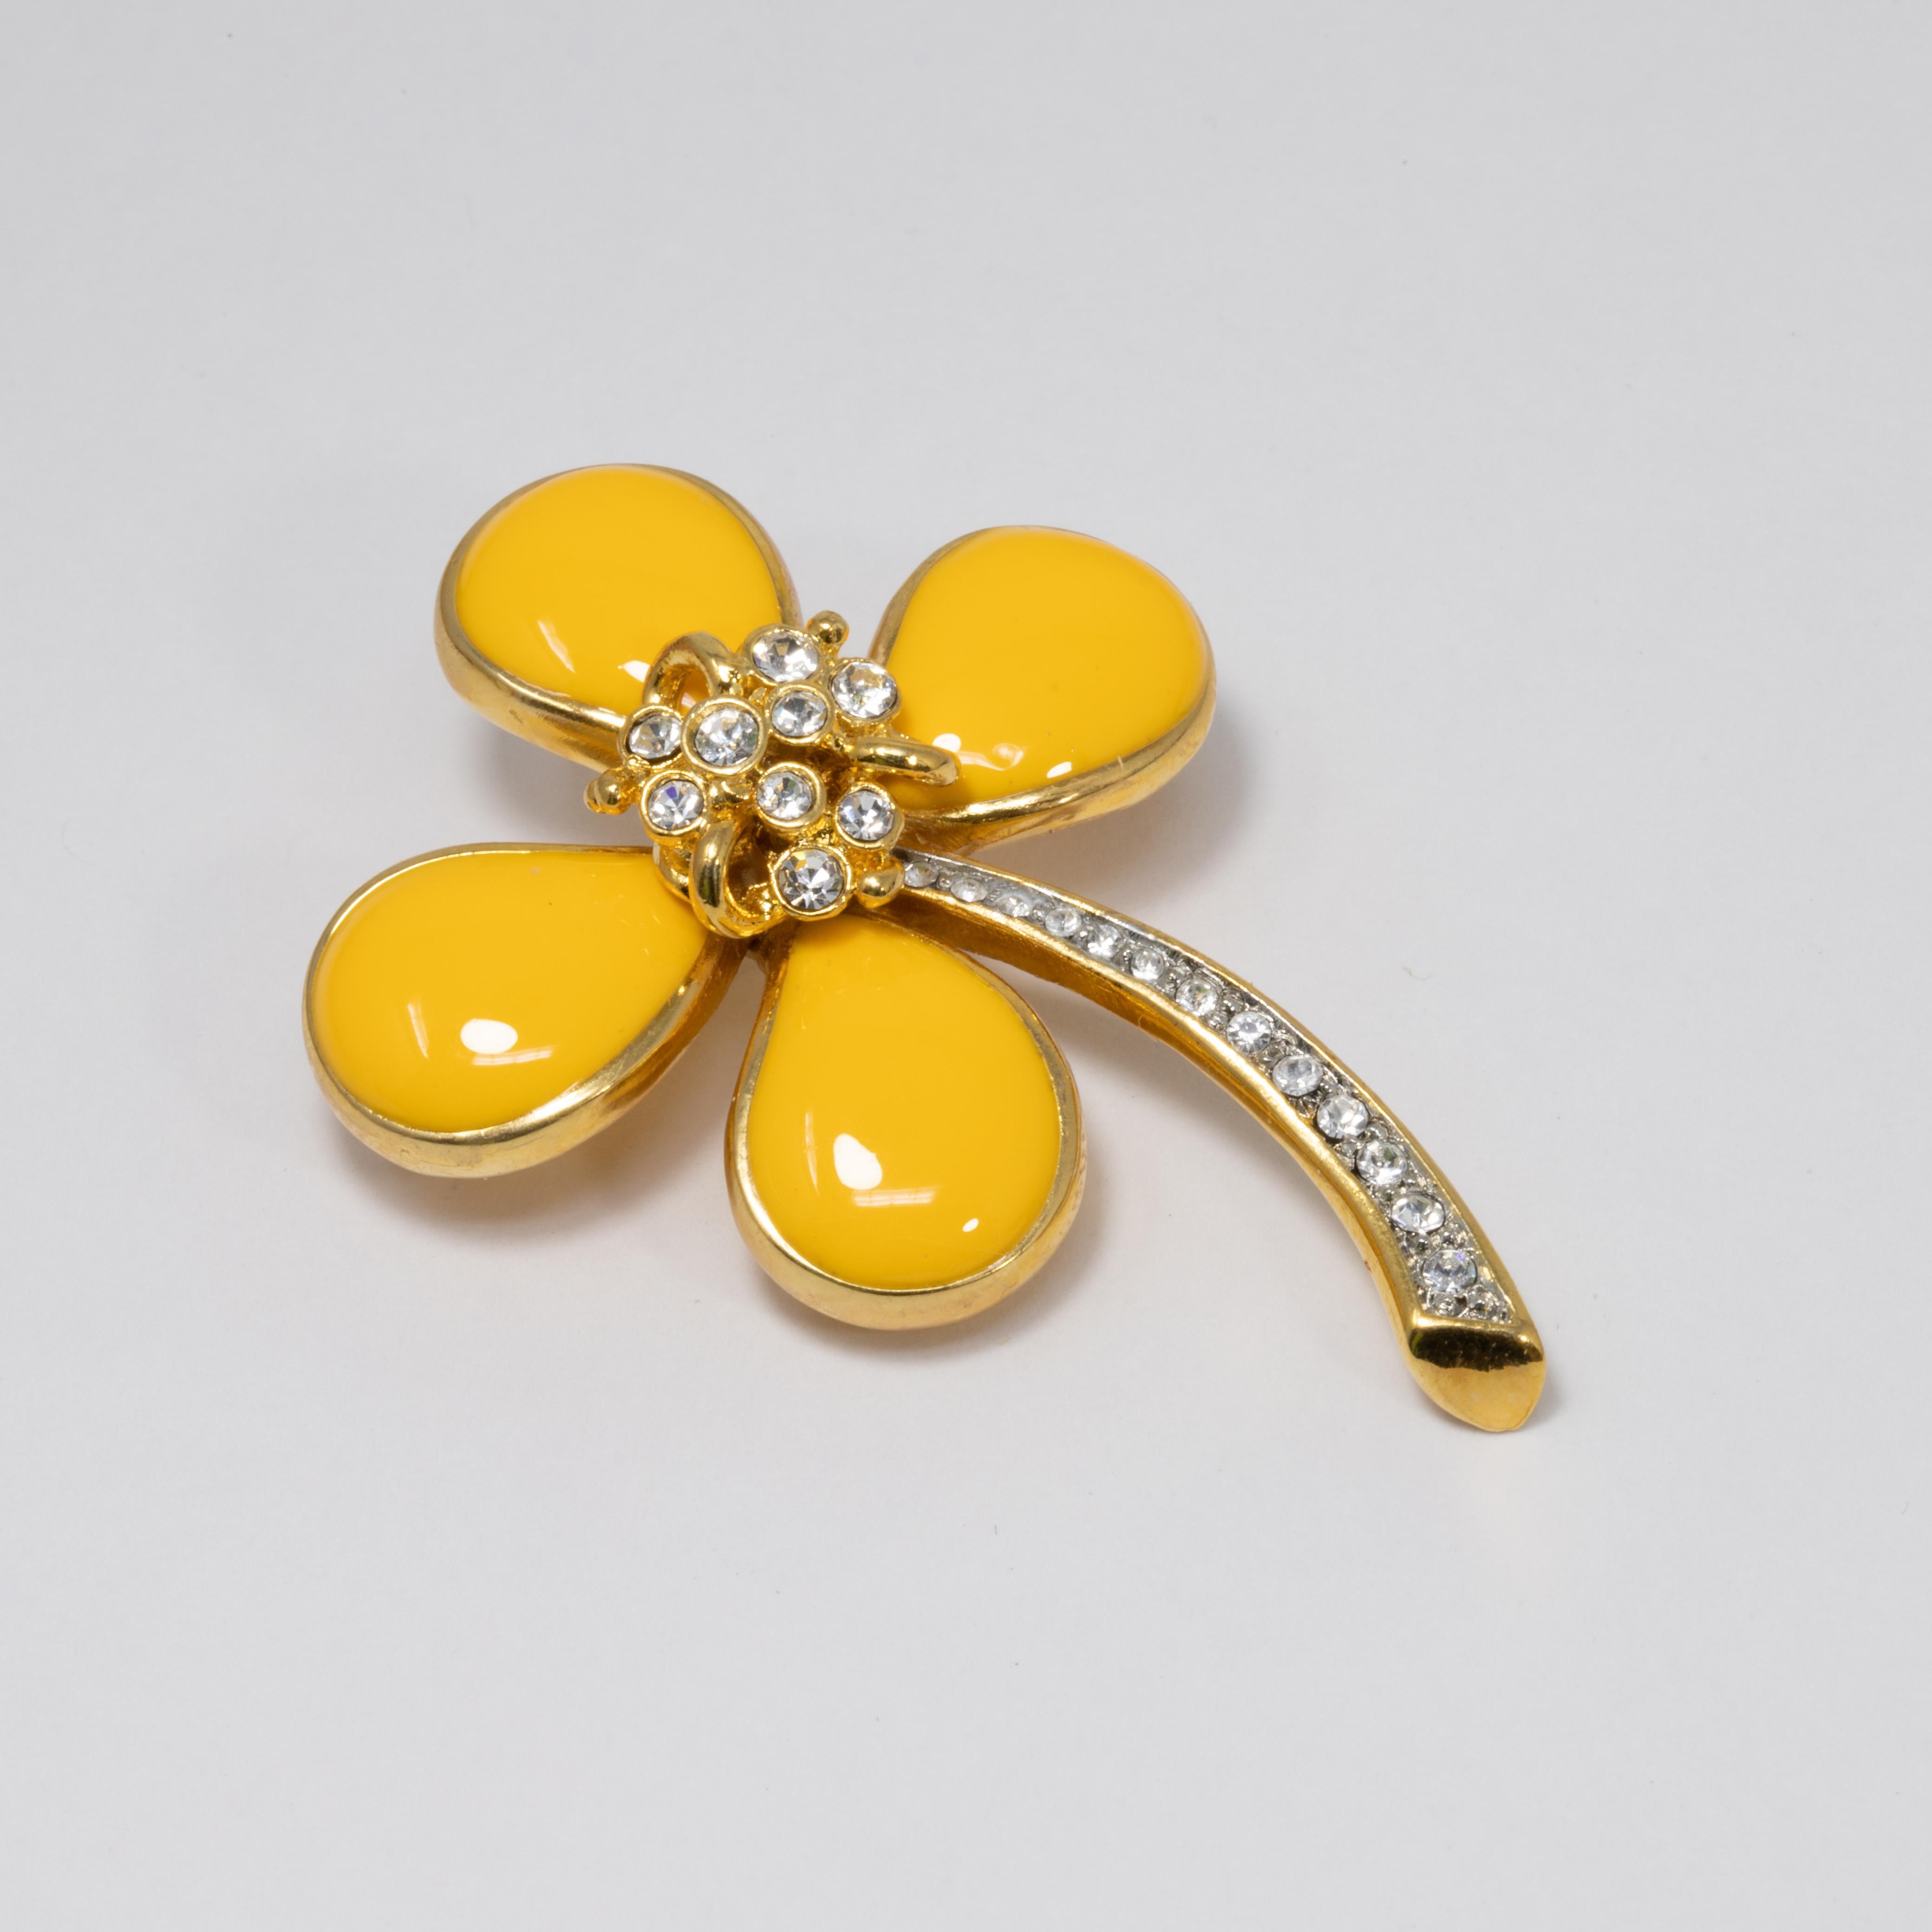 An embellished flower pin brooch by Kenneth Jay Lane. Features vibrant yellow petals accented with a clear crystal center and gold-plated stem.

Hallmarks: Kenneth Lane, Made in USA